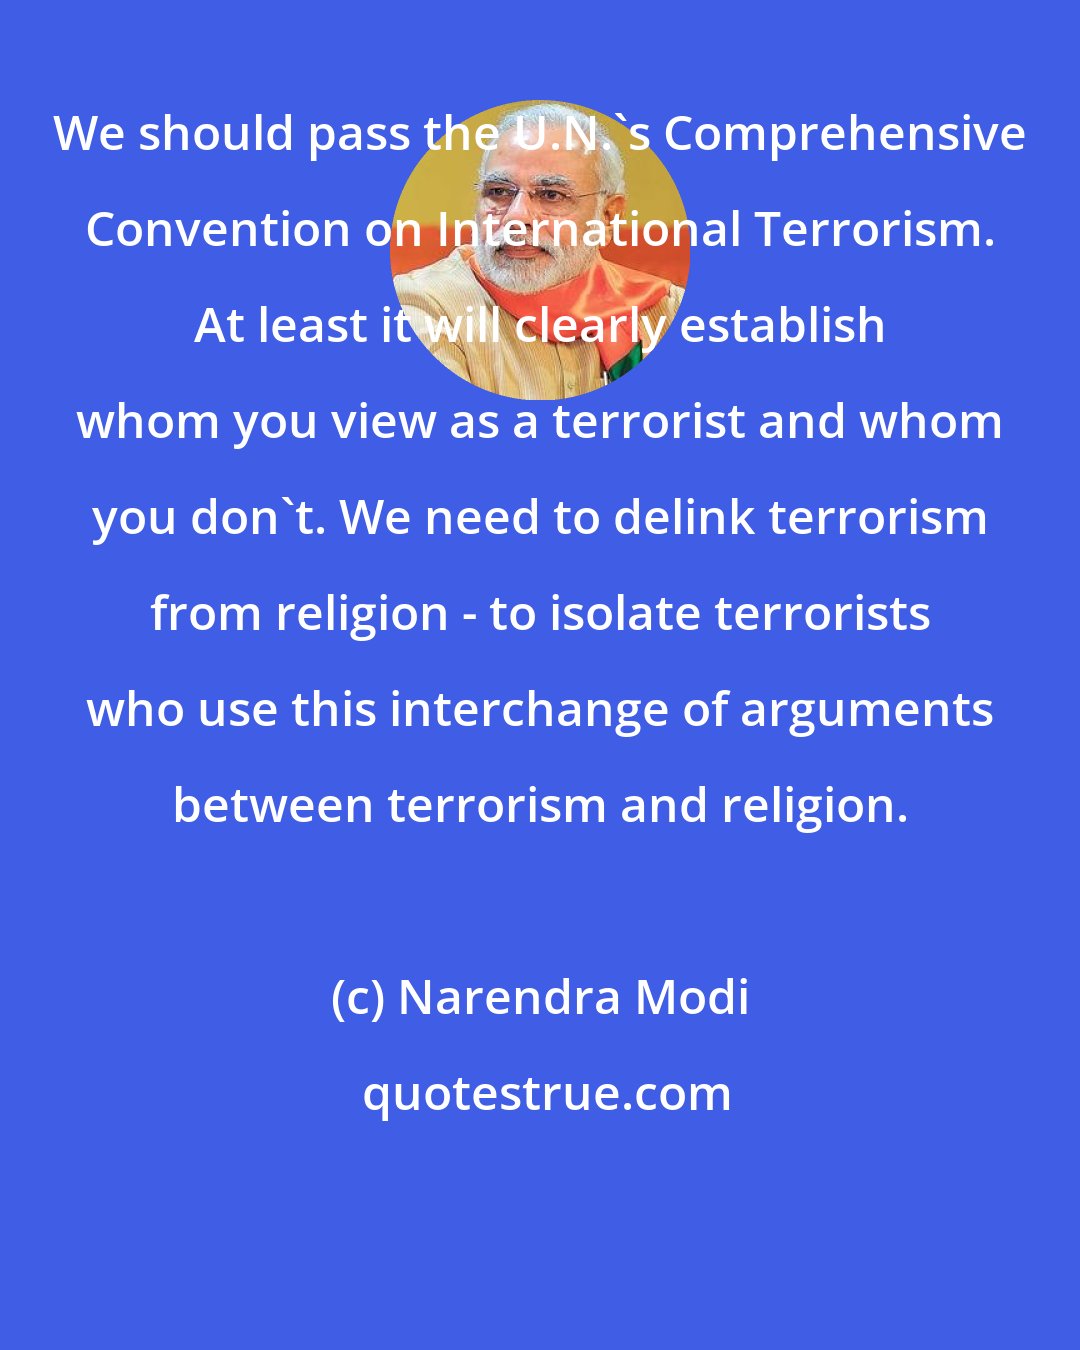 Narendra Modi: We should pass the U.N.'s Comprehensive Convention on International Terrorism. At least it will clearly establish whom you view as a terrorist and whom you don't. We need to delink terrorism from religion - to isolate terrorists who use this interchange of arguments between terrorism and religion.